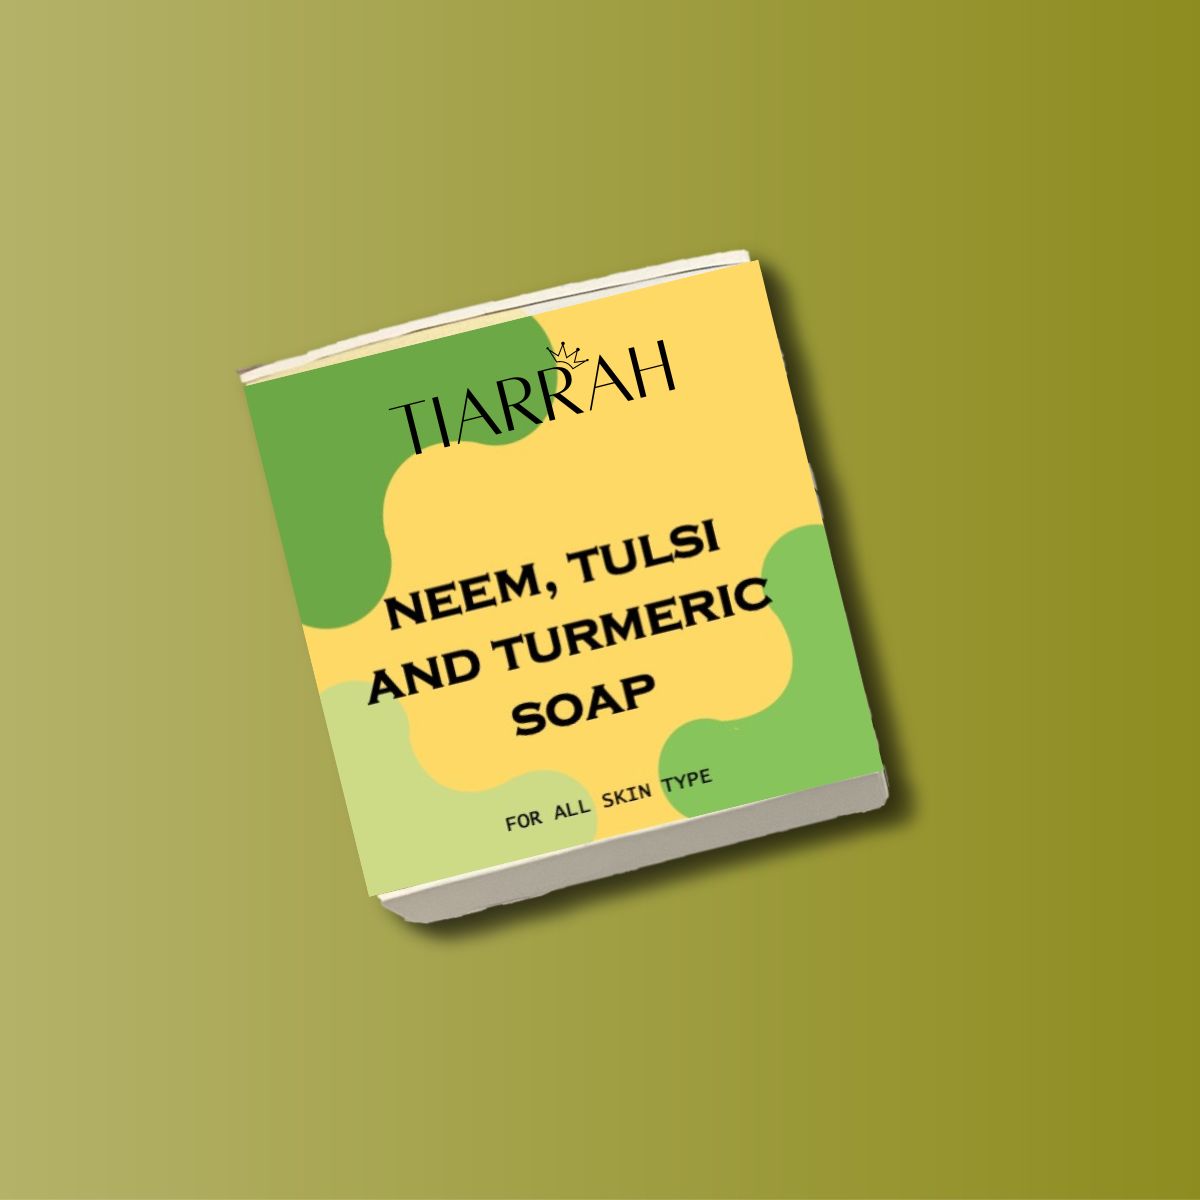 Luxury Neem, Tulsi, and Turmeric Soap by Tiarrah: Organic, Non-Toxic - The Luxury Bath and Body Care Shop